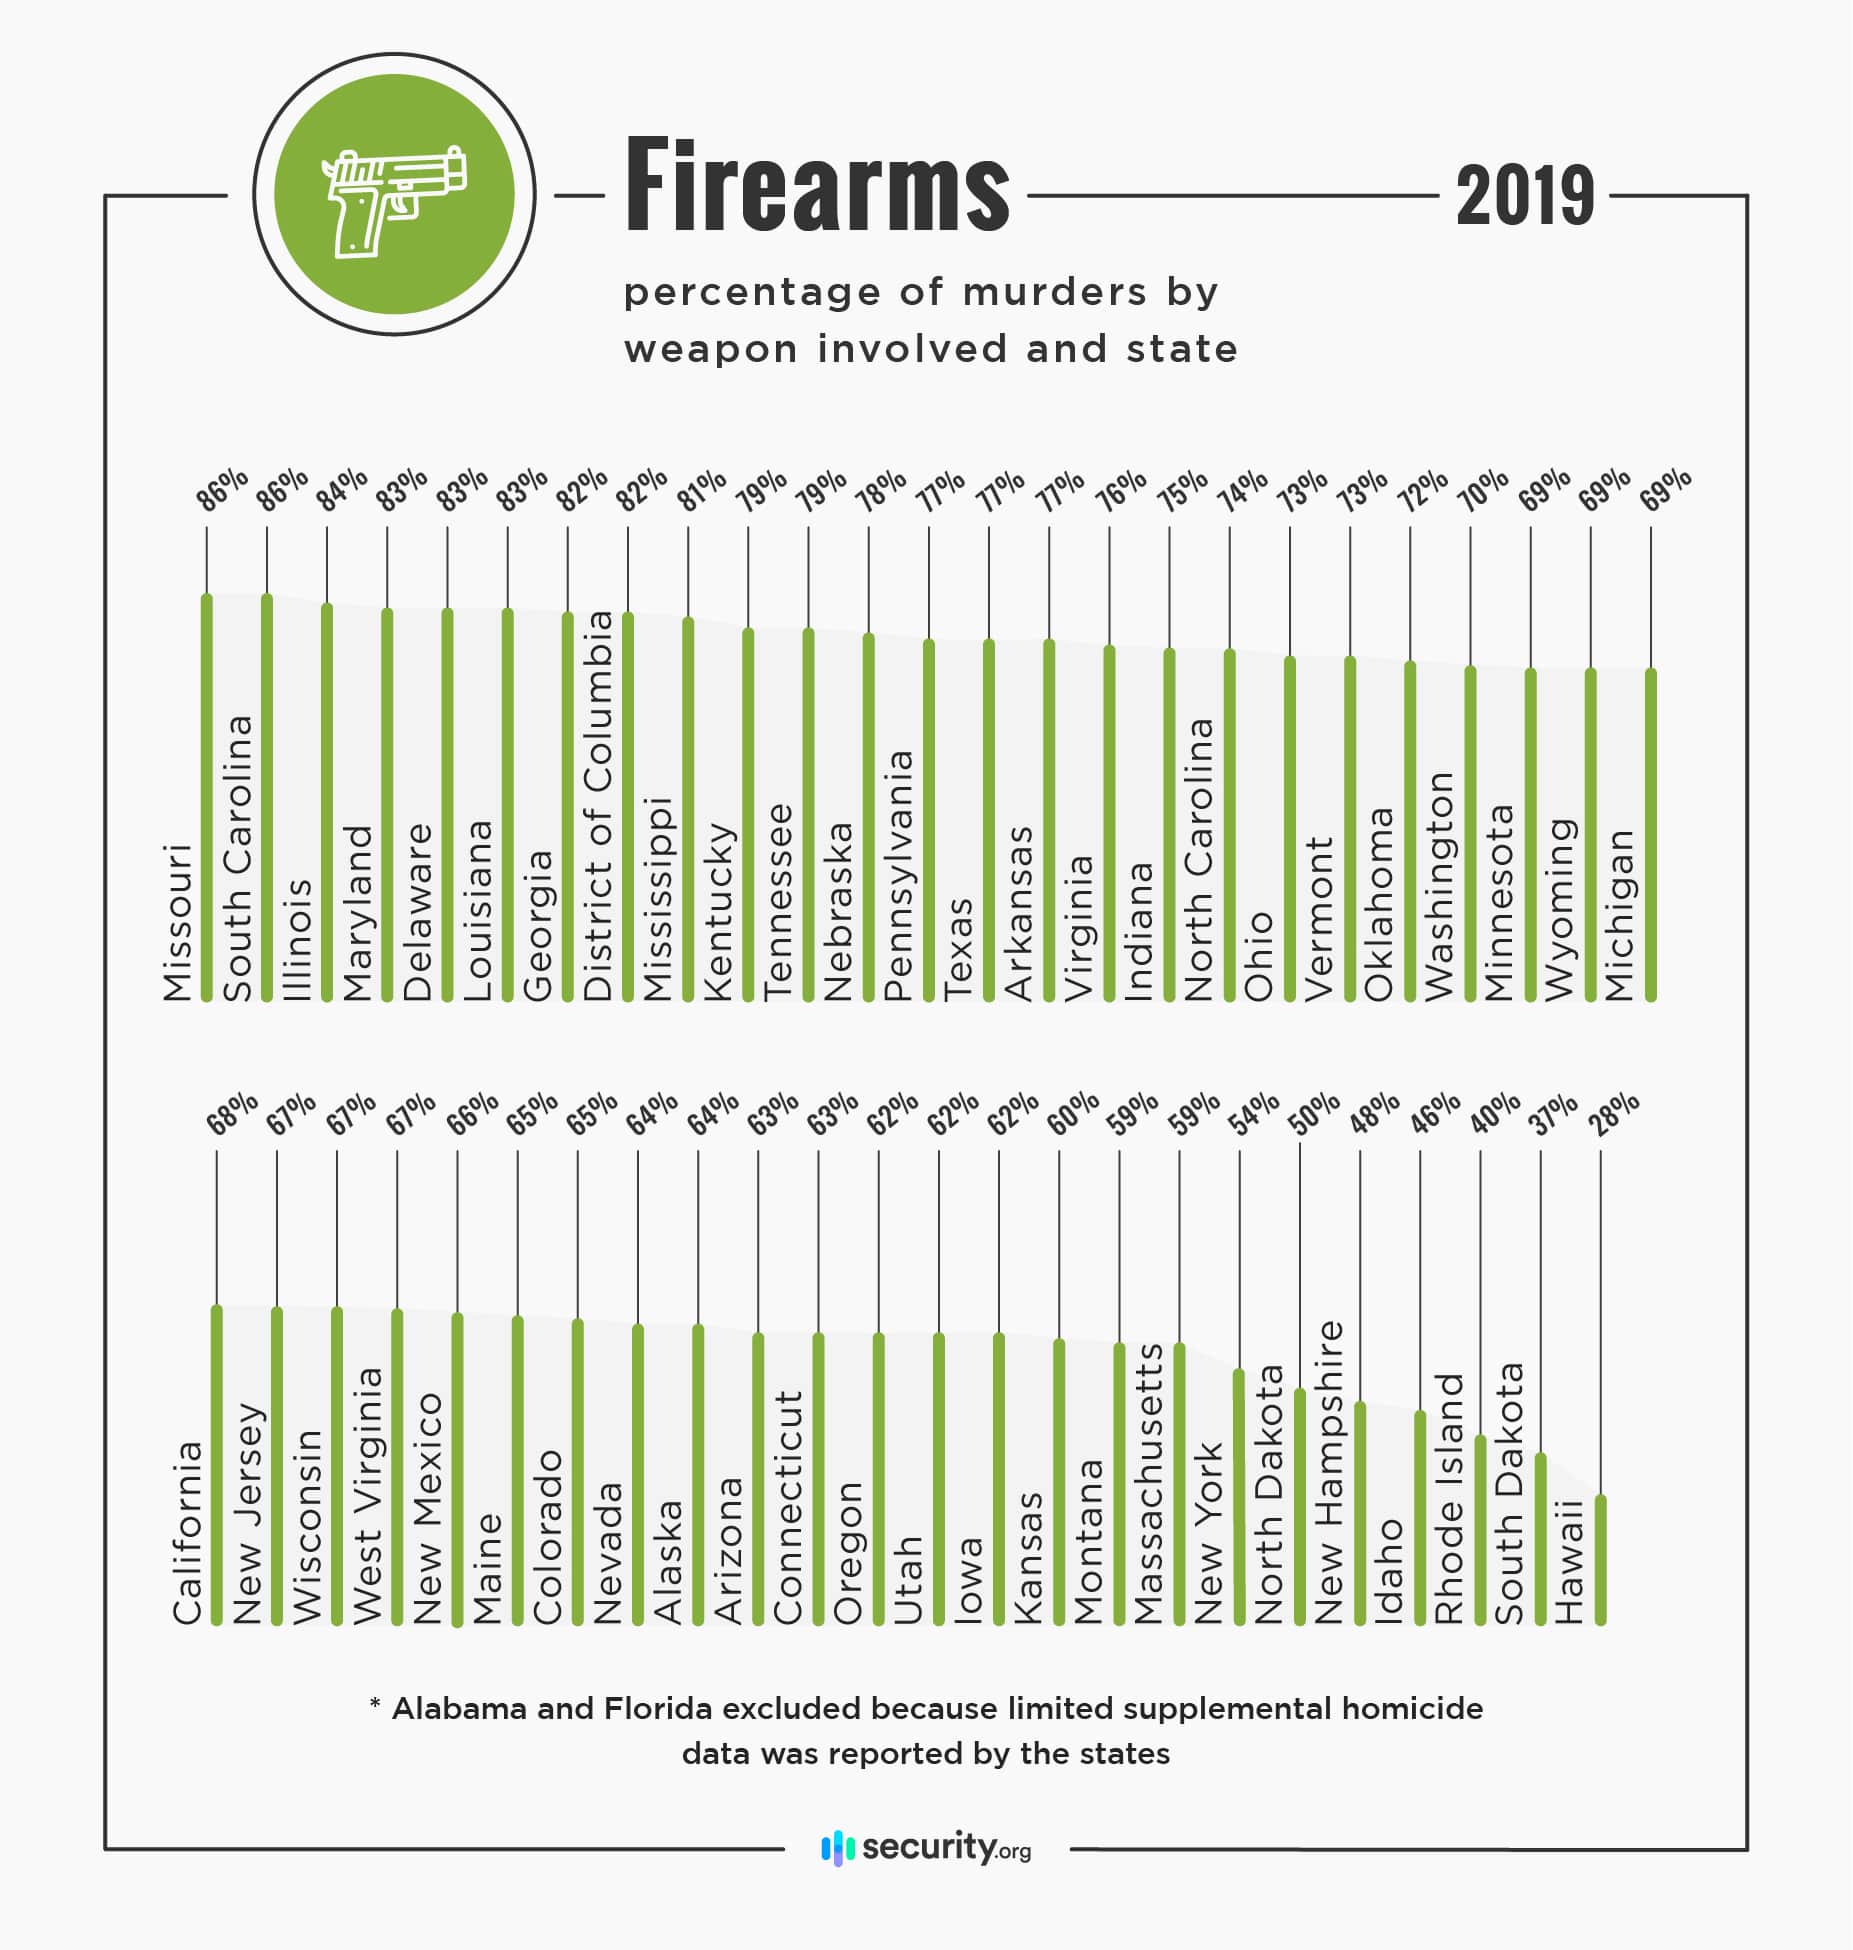 Firearms - percentage of murders by weapon involved and state in 2019